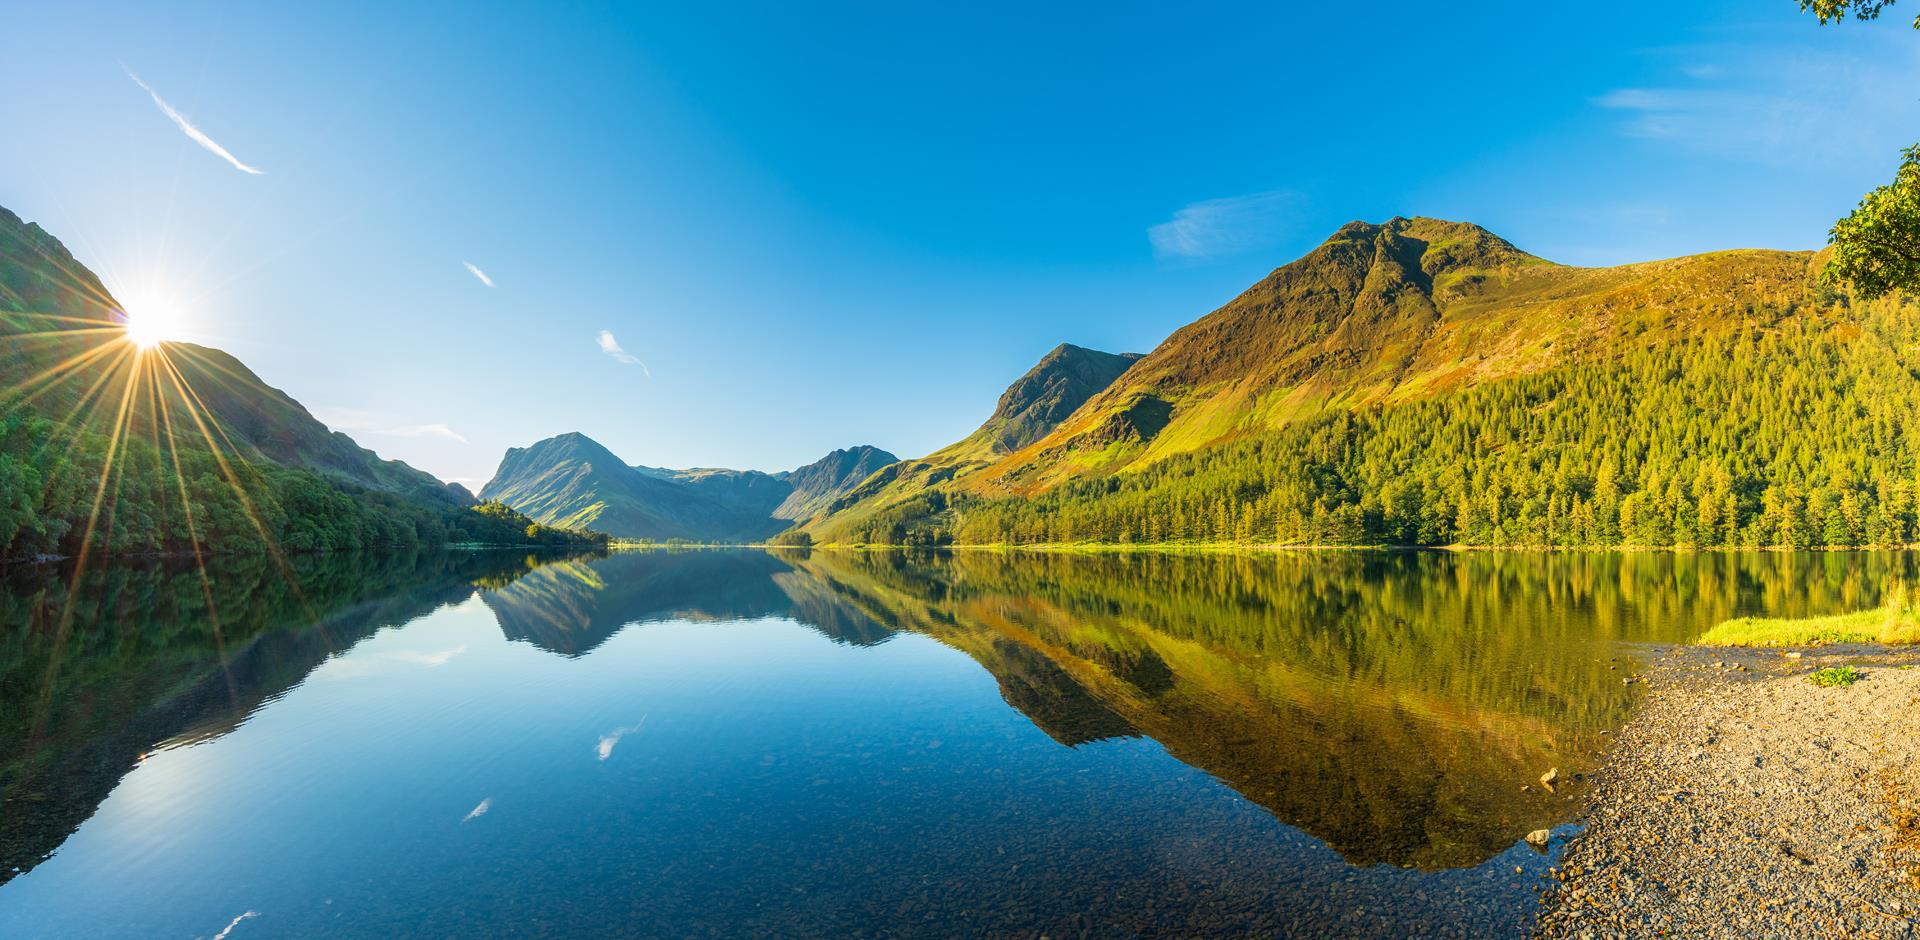 Sun rising over Buttermere Lake, Lake District. England